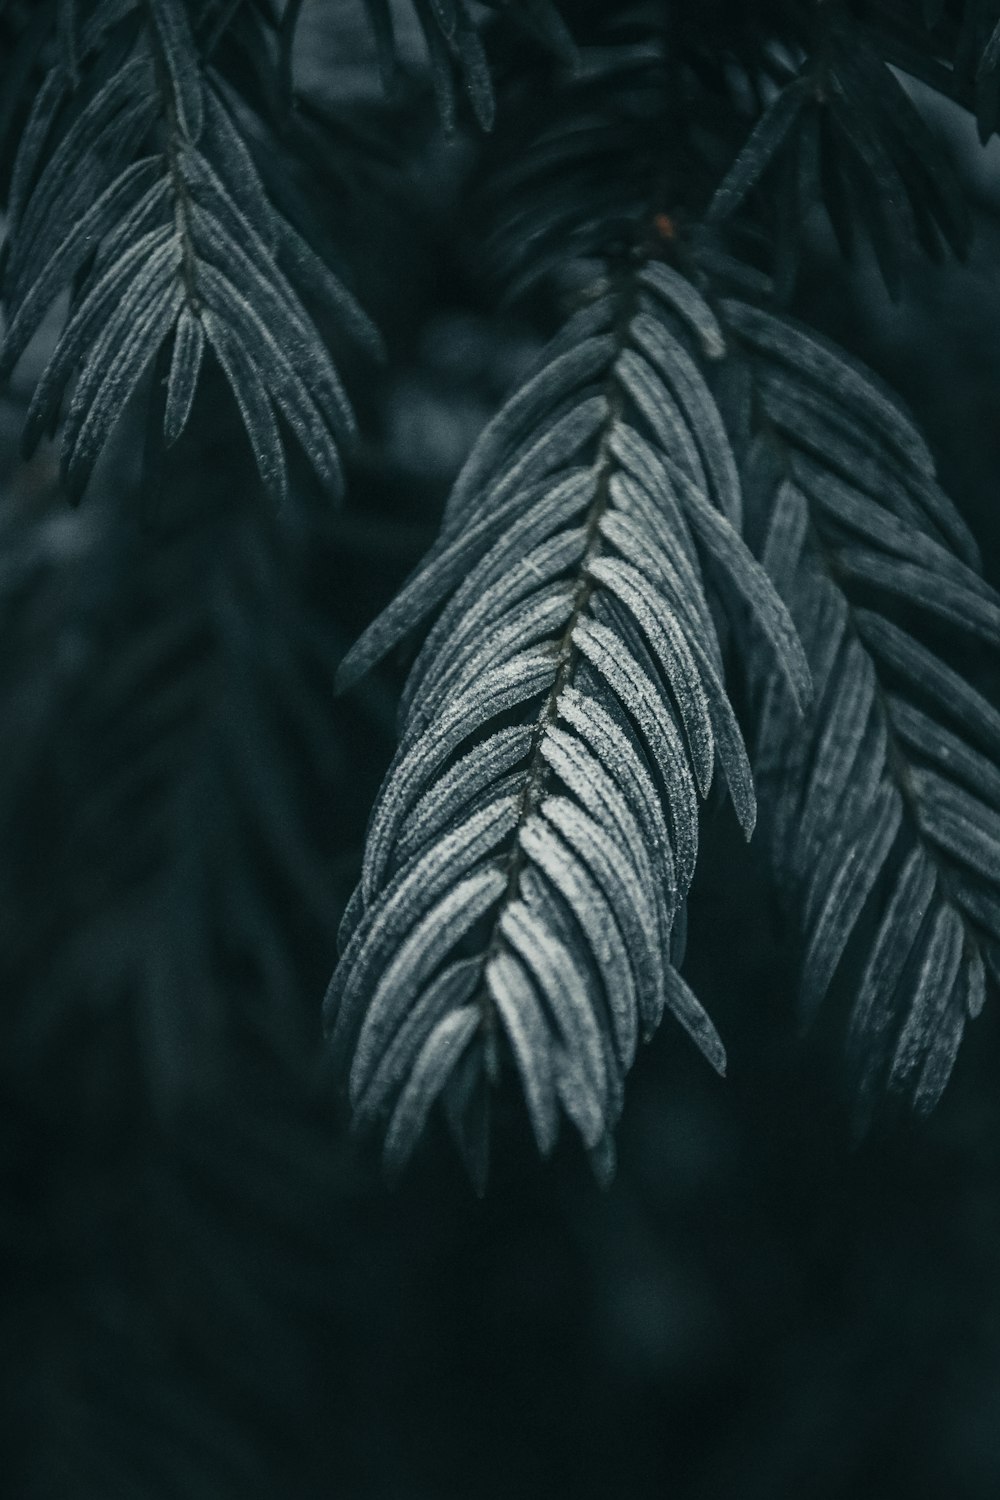 a black and white photo of leaves